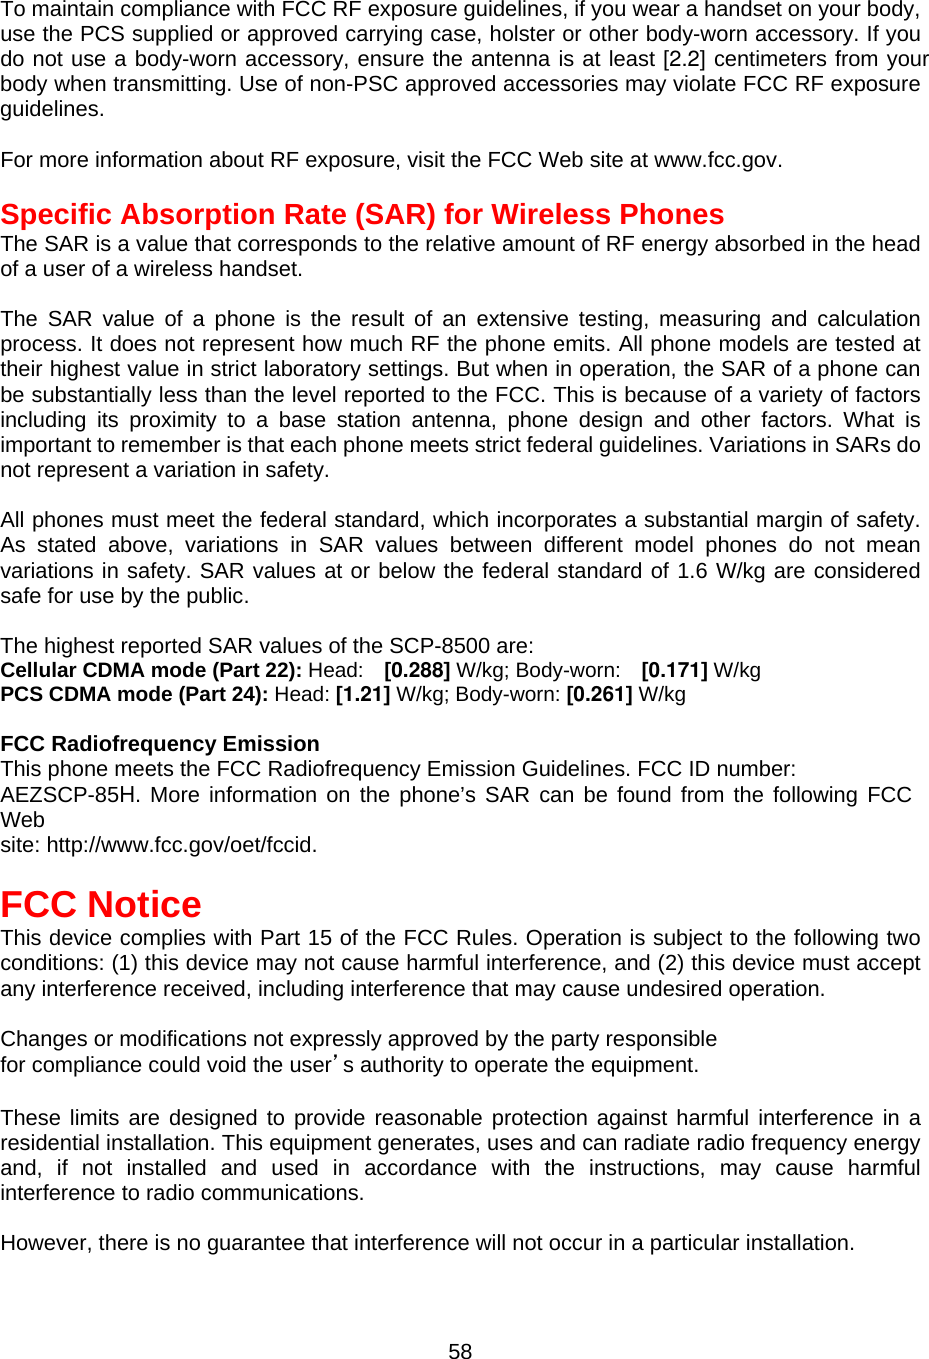 To maintain compliance with FCC RF exposure guidelines, if you wear a handset on your body, use the PCS supplied or approved carrying case, holster or other body-worn accessory. If you do not use a body-worn accessory, ensure the antenna is at least [2.2] centimeters from your body when transmitting. Use of non-PSC approved accessories may violate FCC RF exposure guidelines.  For more information about RF exposure, visit the FCC Web site at www.fcc.gov.  Specific Absorption Rate (SAR) for Wireless Phones The SAR is a value that corresponds to the relative amount of RF energy absorbed in the head of a user of a wireless handset.    The SAR value of a phone is the result of an extensive testing, measuring and calculation process. It does not represent how much RF the phone emits. All phone models are tested at their highest value in strict laboratory settings. But when in operation, the SAR of a phone can be substantially less than the level reported to the FCC. This is because of a variety of factors including its proximity to a base station antenna, phone design and other factors. What is important to remember is that each phone meets strict federal guidelines. Variations in SARs do not represent a variation in safety.  All phones must meet the federal standard, which incorporates a substantial margin of safety. As stated above, variations in SAR values between different model phones do not mean variations in safety. SAR values at or below the federal standard of 1.6 W/kg are considered safe for use by the public.  The highest reported SAR values of the SCP-8500 are: Cellular CDMA mode (Part 22): Head:  [0.288] W/kg; Body-worn:  [0.171] W/kg PCS CDMA mode (Part 24): Head: [1.21] W/kg; Body-worn: [0.261] W/kg  FCC Radiofrequency Emission This phone meets the FCC Radiofrequency Emission Guidelines. FCC ID number: AEZSCP-85H. More information on the phone’s SAR can be found from the following FCC Web site: http://www.fcc.gov/oet/fccid.  FCC Notice This device complies with Part 15 of the FCC Rules. Operation is subject to the following two conditions: (1) this device may not cause harmful interference, and (2) this device must accept any interference received, including interference that may cause undesired operation.  Changes or modifications not expressly approved by the party responsible for compliance could void the user’s authority to operate the equipment.  These limits are designed to provide reasonable protection against harmful interference in a residential installation. This equipment generates, uses and can radiate radio frequency energy and, if not installed and used in accordance with the instructions, may cause harmful interference to radio communications.  However, there is no guarantee that interference will not occur in a particular installation.  58